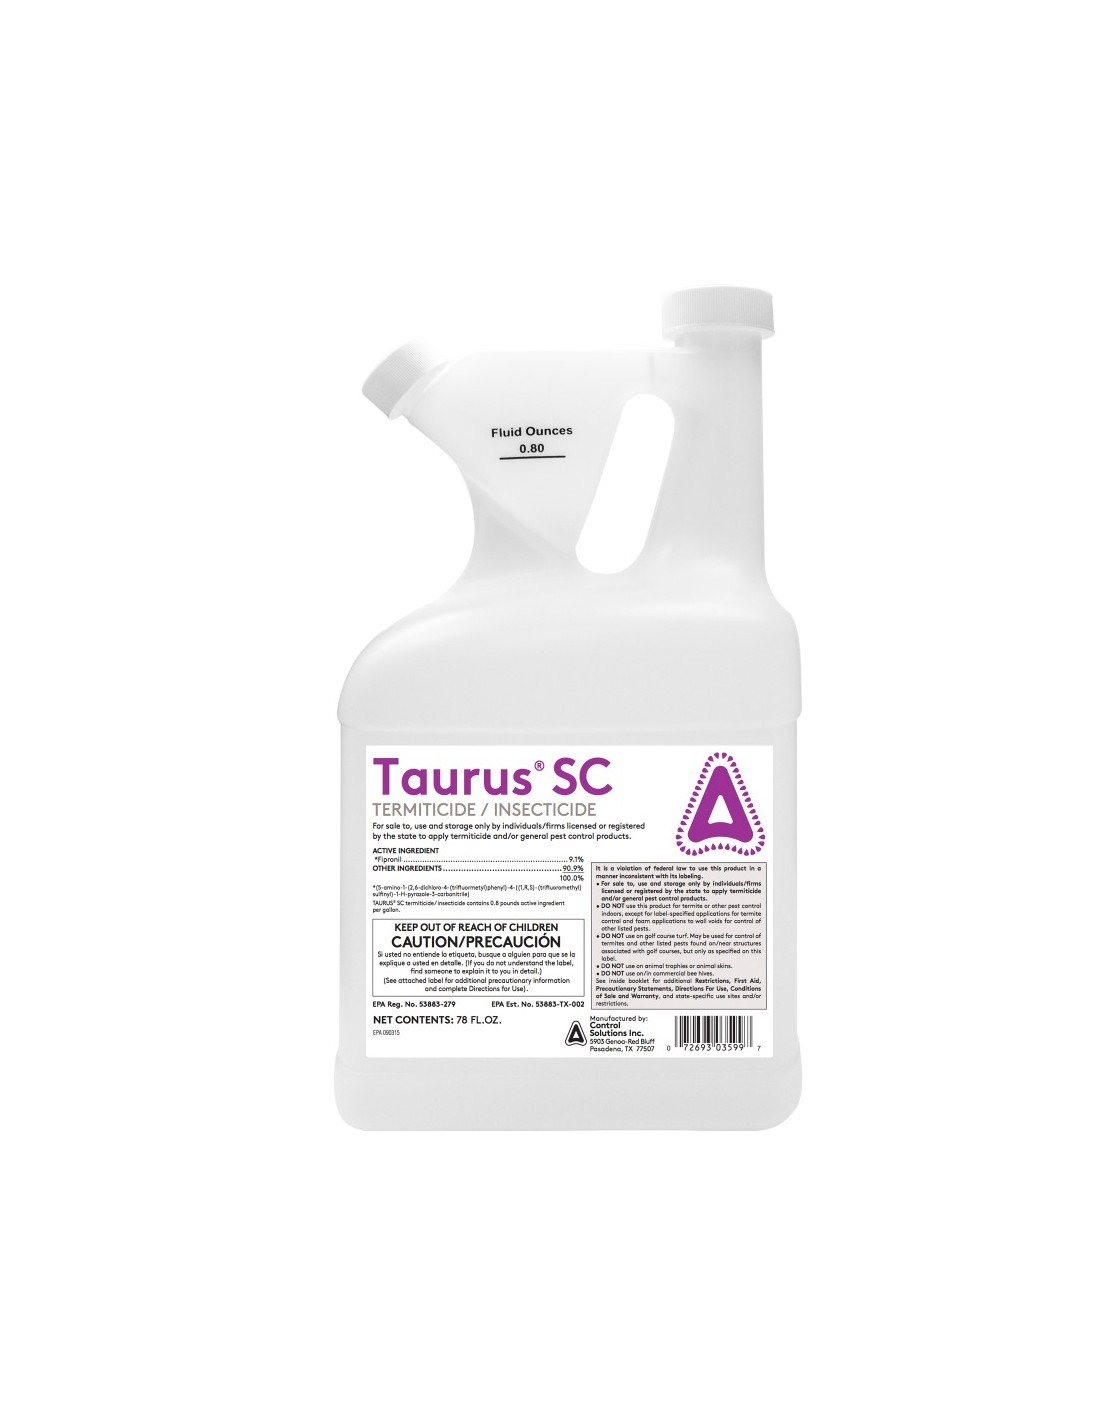 Taurus SC Termiticide Insecticide 78 oz Questions & Answers